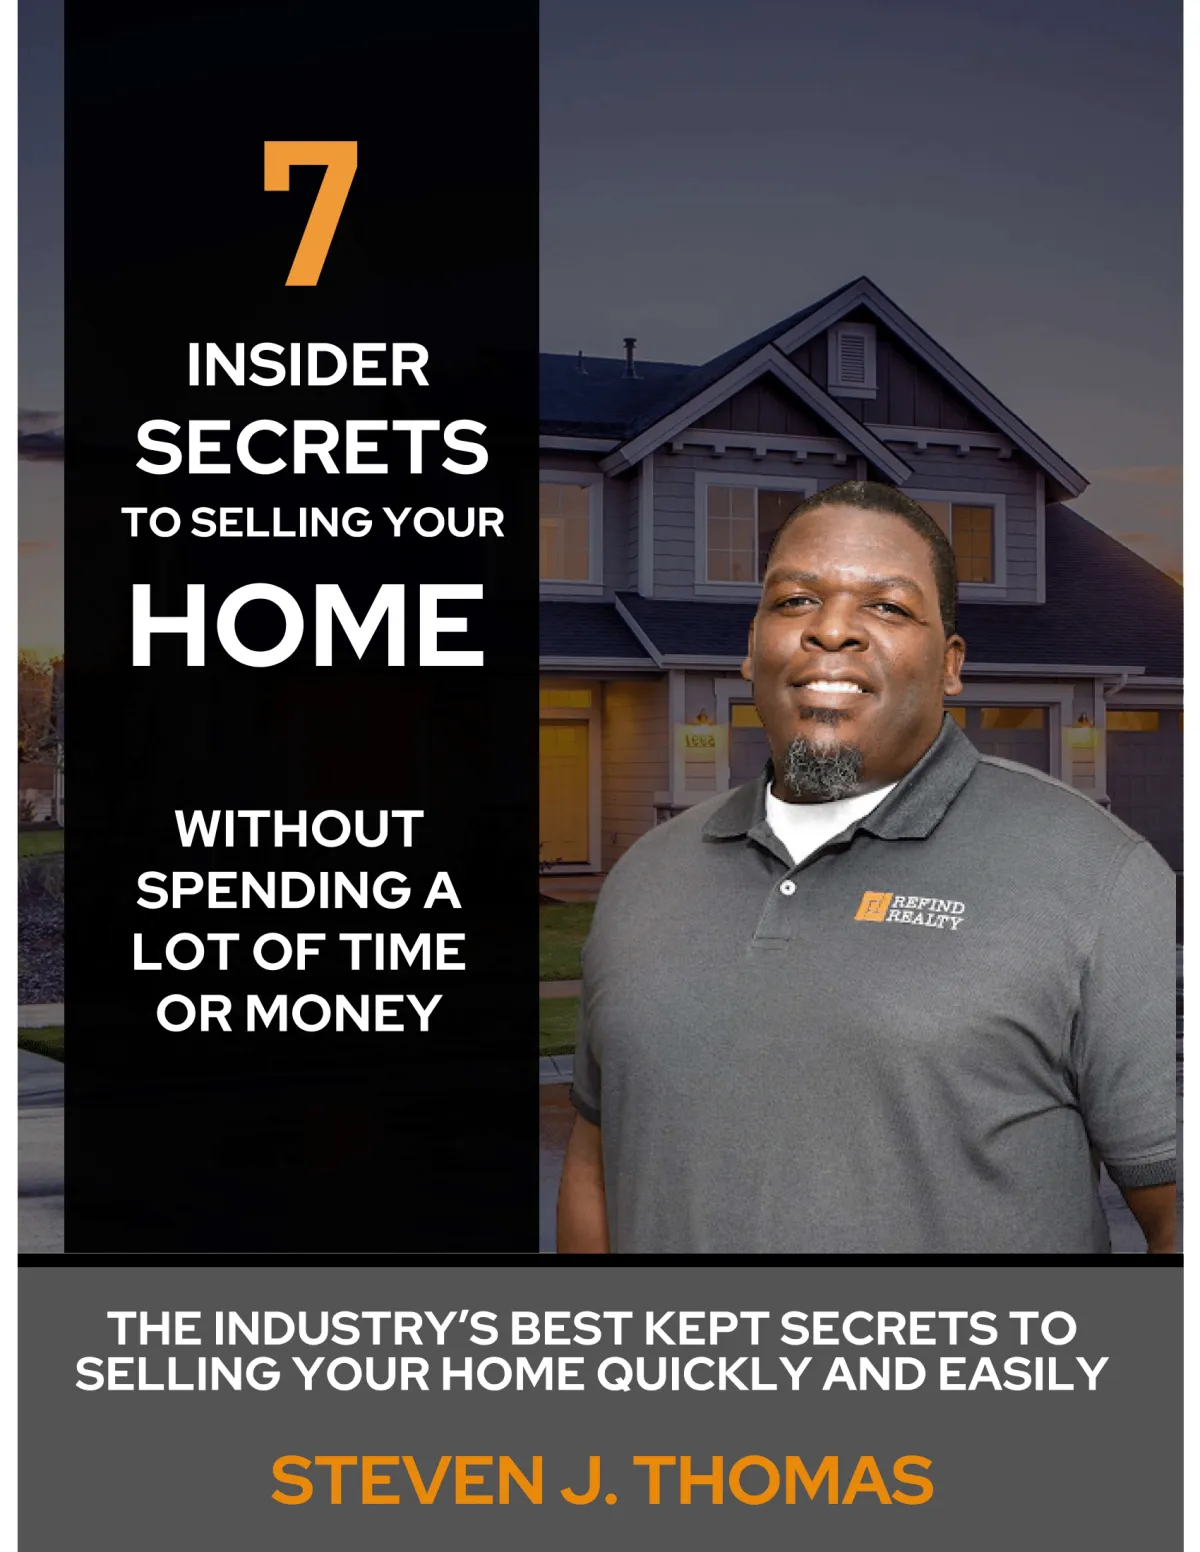 7 Insider Secrets To Selling Your Home w/o a Lot of Time or Money